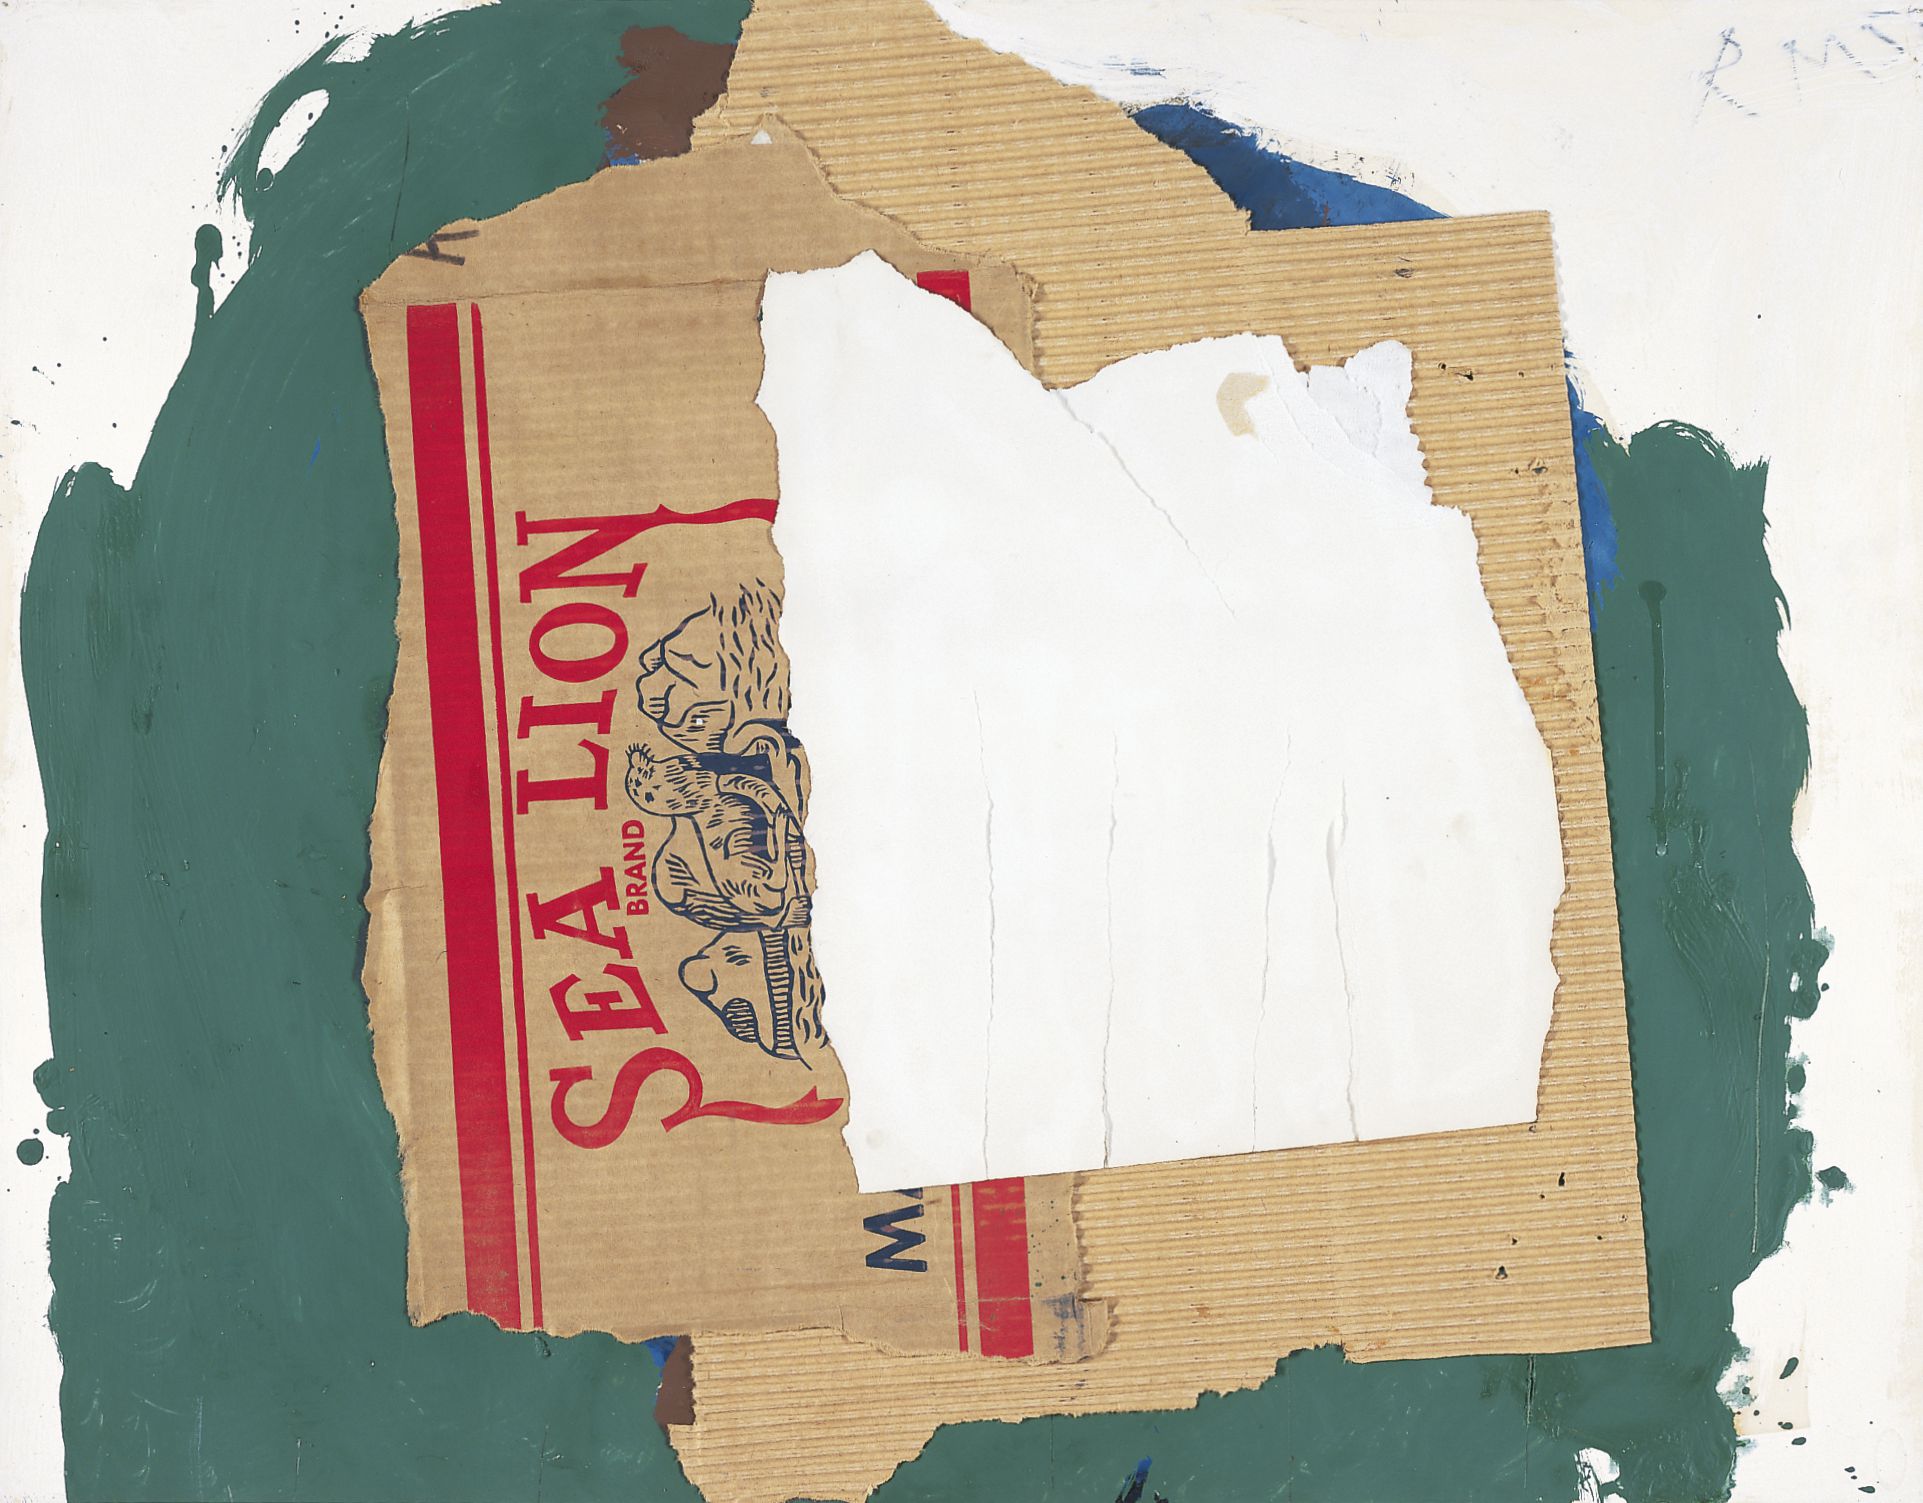 Sea Lion, 1959. Oil, pasted paper, pasted cardboard, and graphite on paper, 23 3/8 x 28 3/8 inches (56.8 x 72.1 cm)